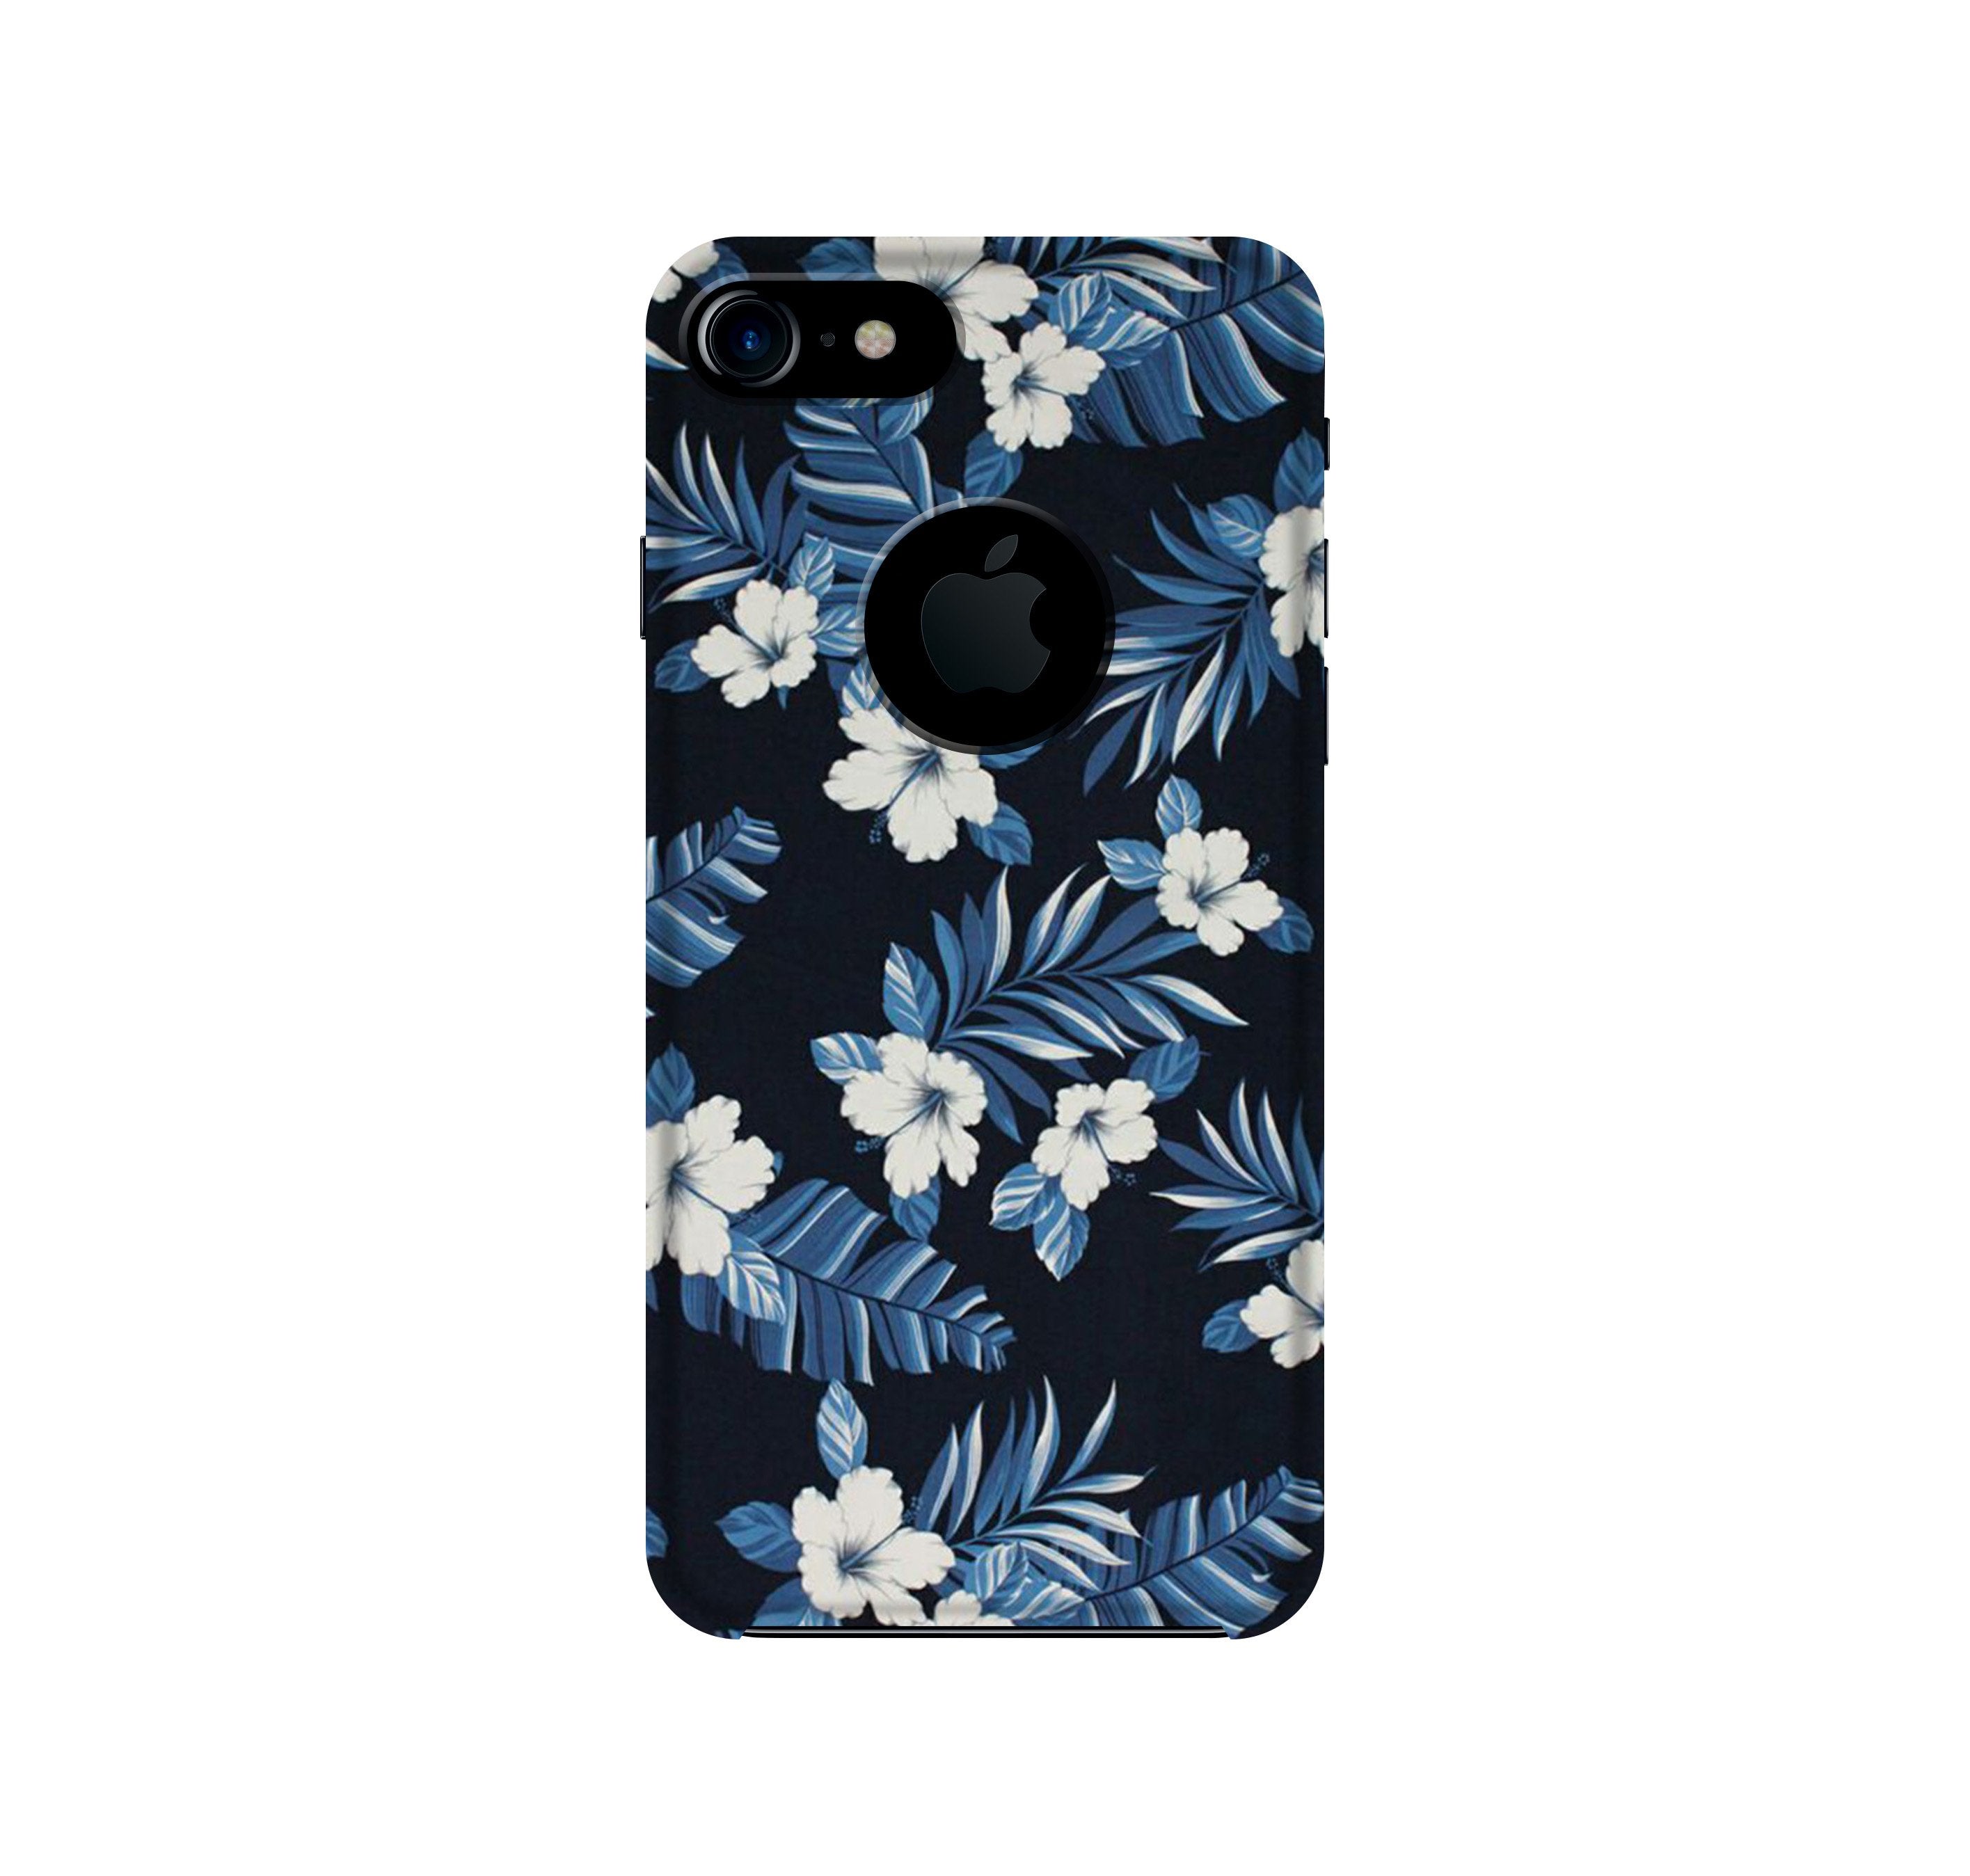 White flowers Blue Background2 Case for iPhone 7 logo cut